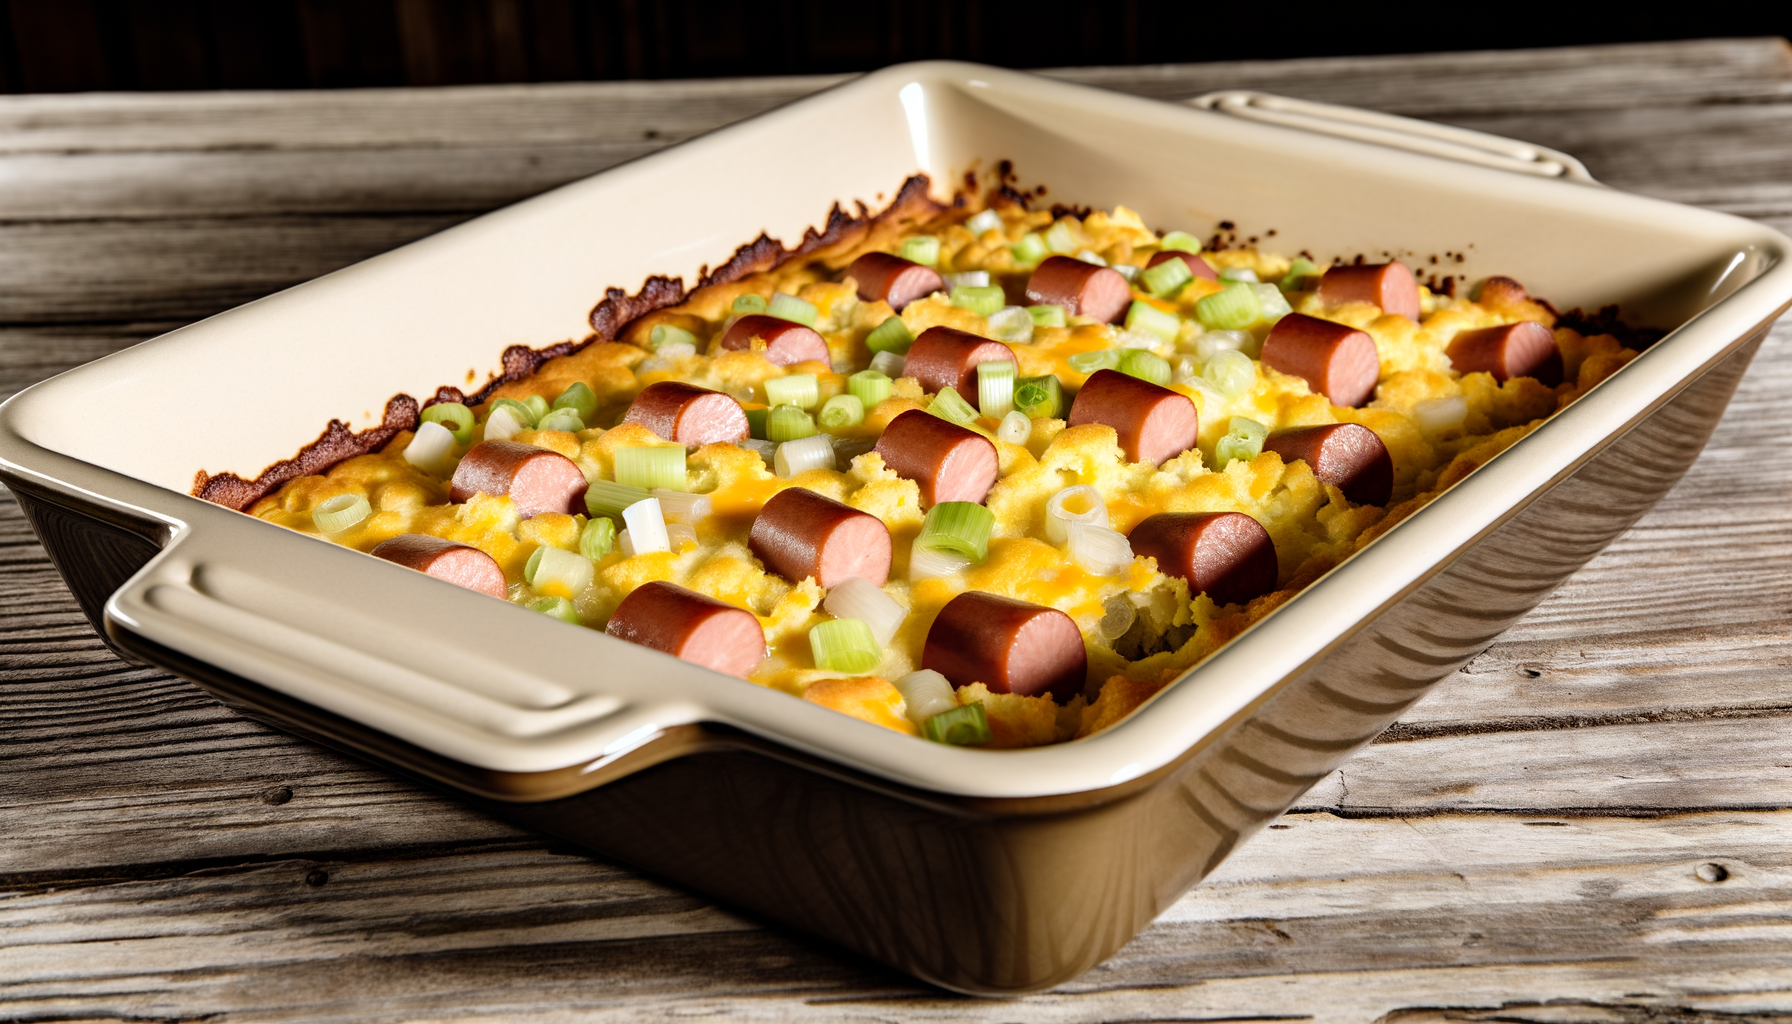 Corn Dog Casserole with melting cheddar cheese on top, displayed in a casserole dish on a wooden table